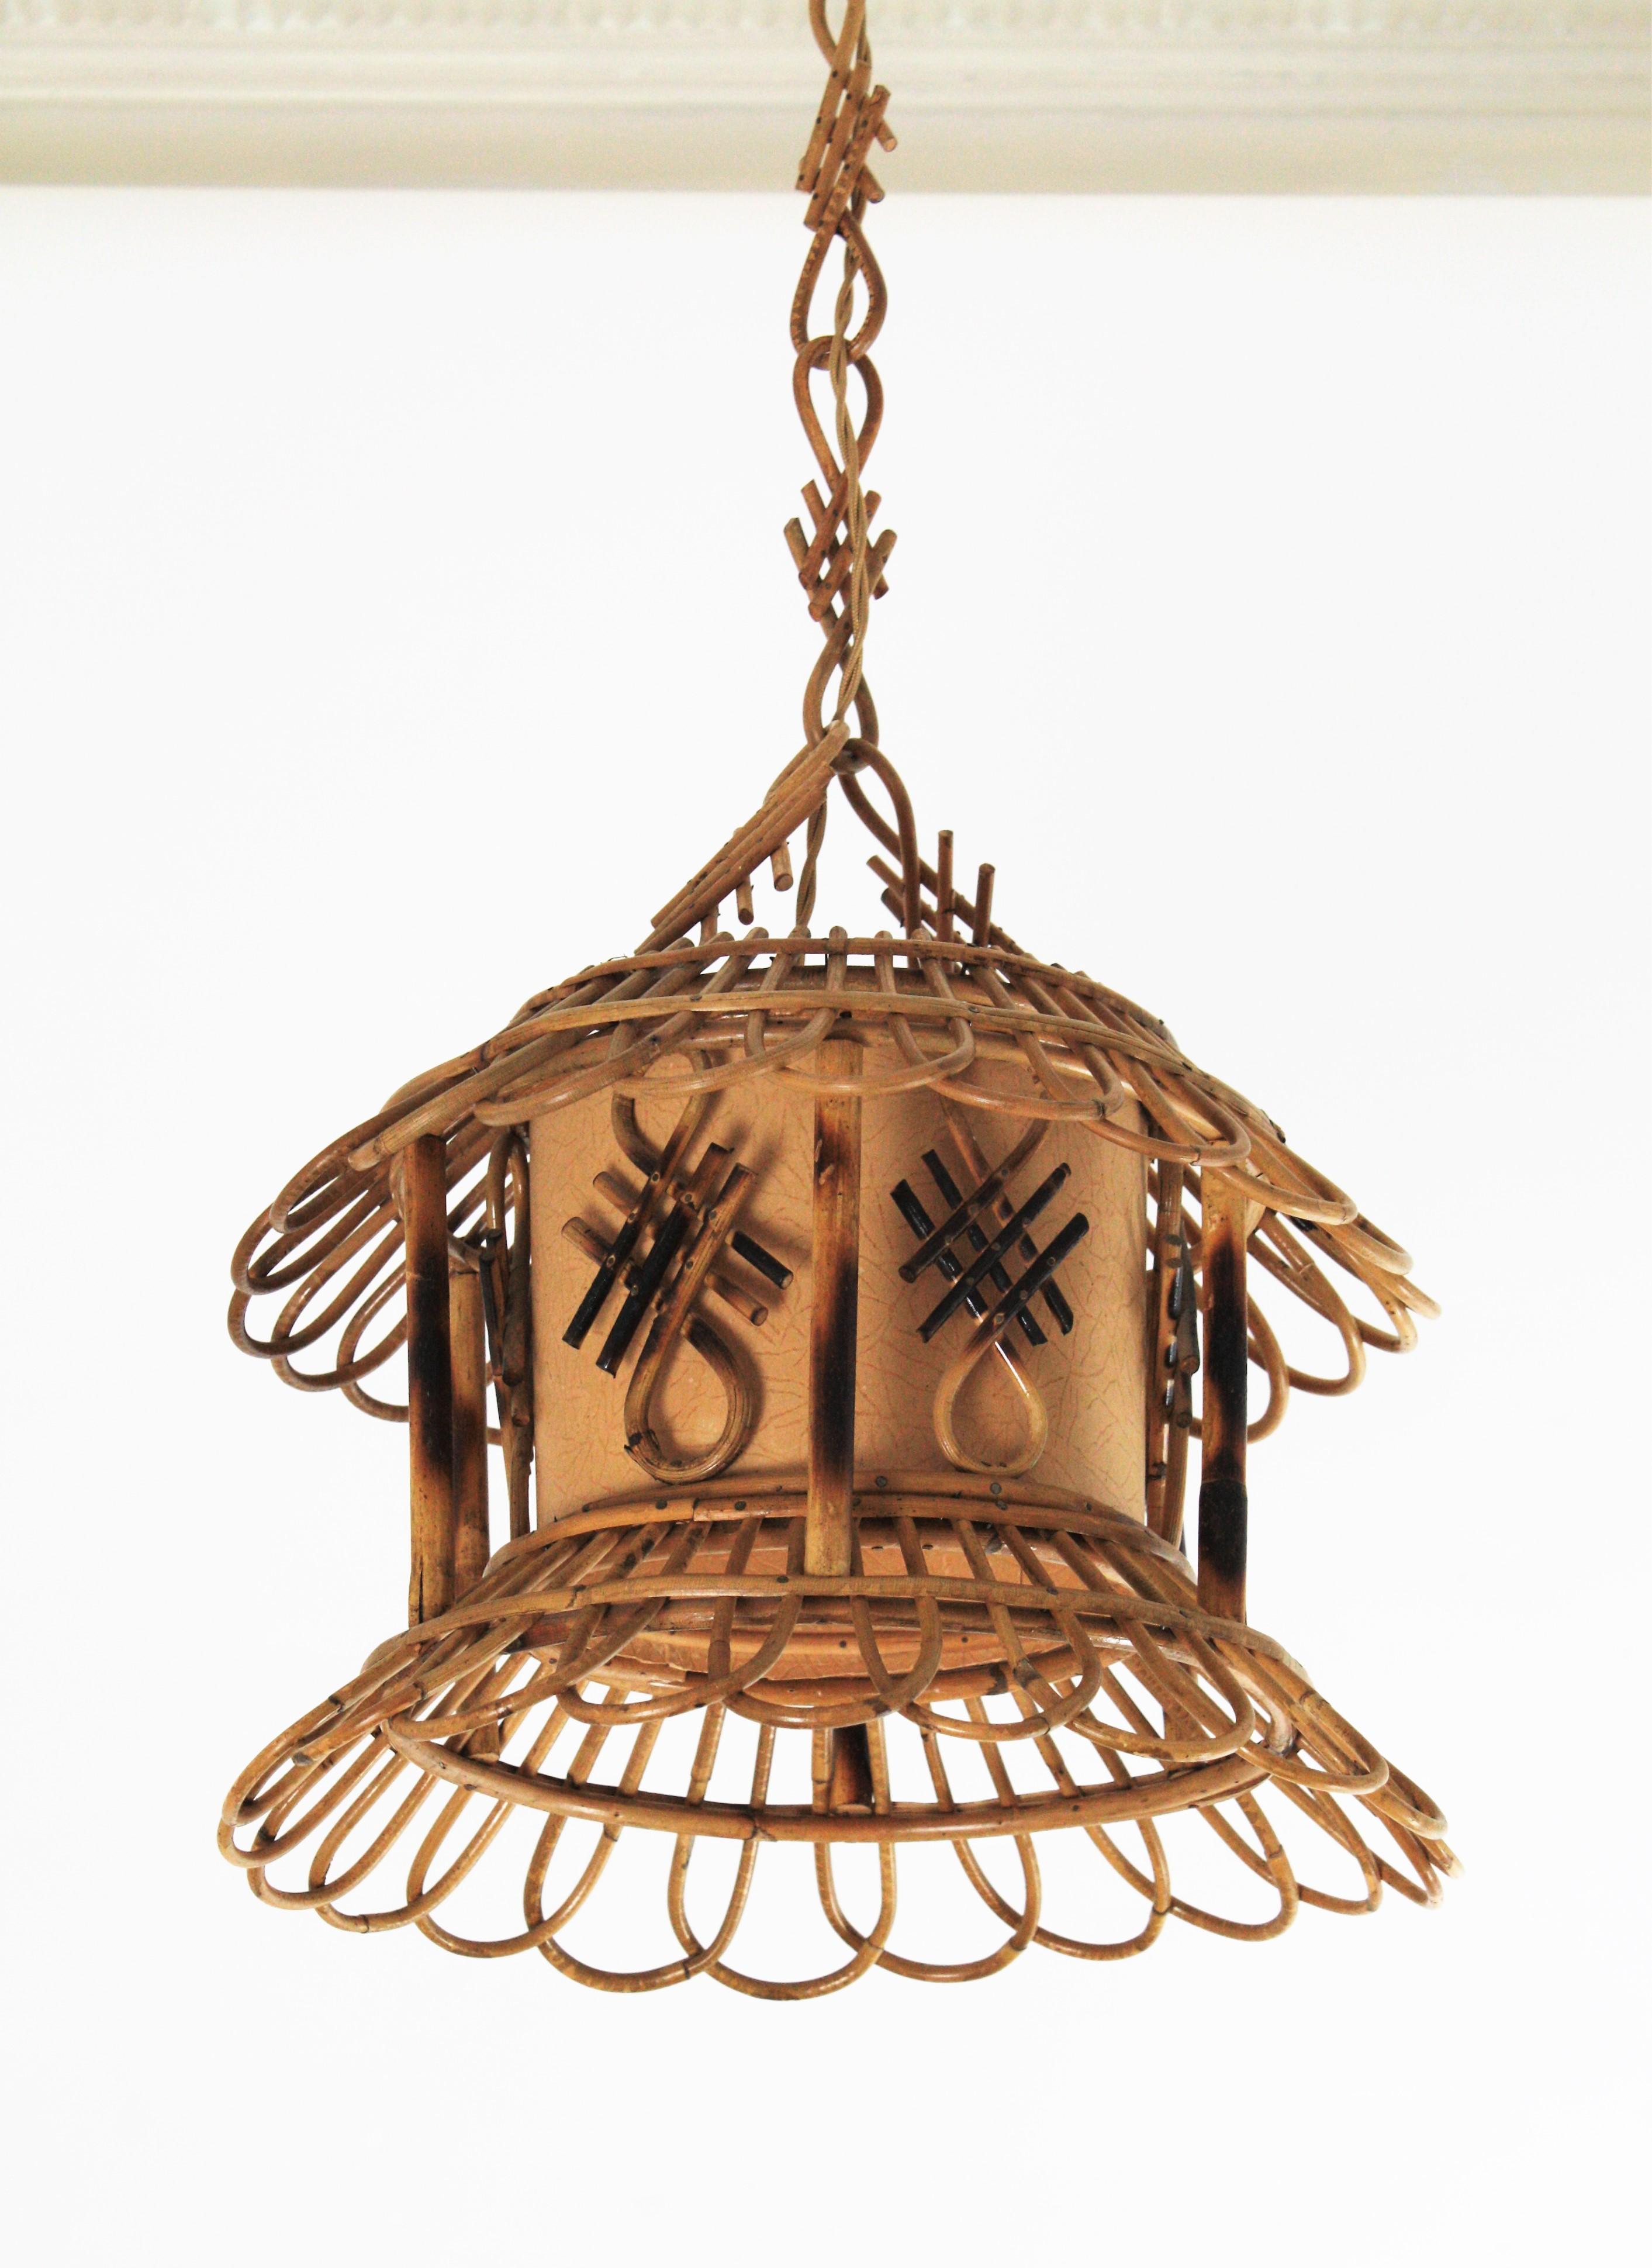 Hand-Crafted French Modernist Rattan Pagoda Pendant / Hanging Light with Chinoiserie Accents